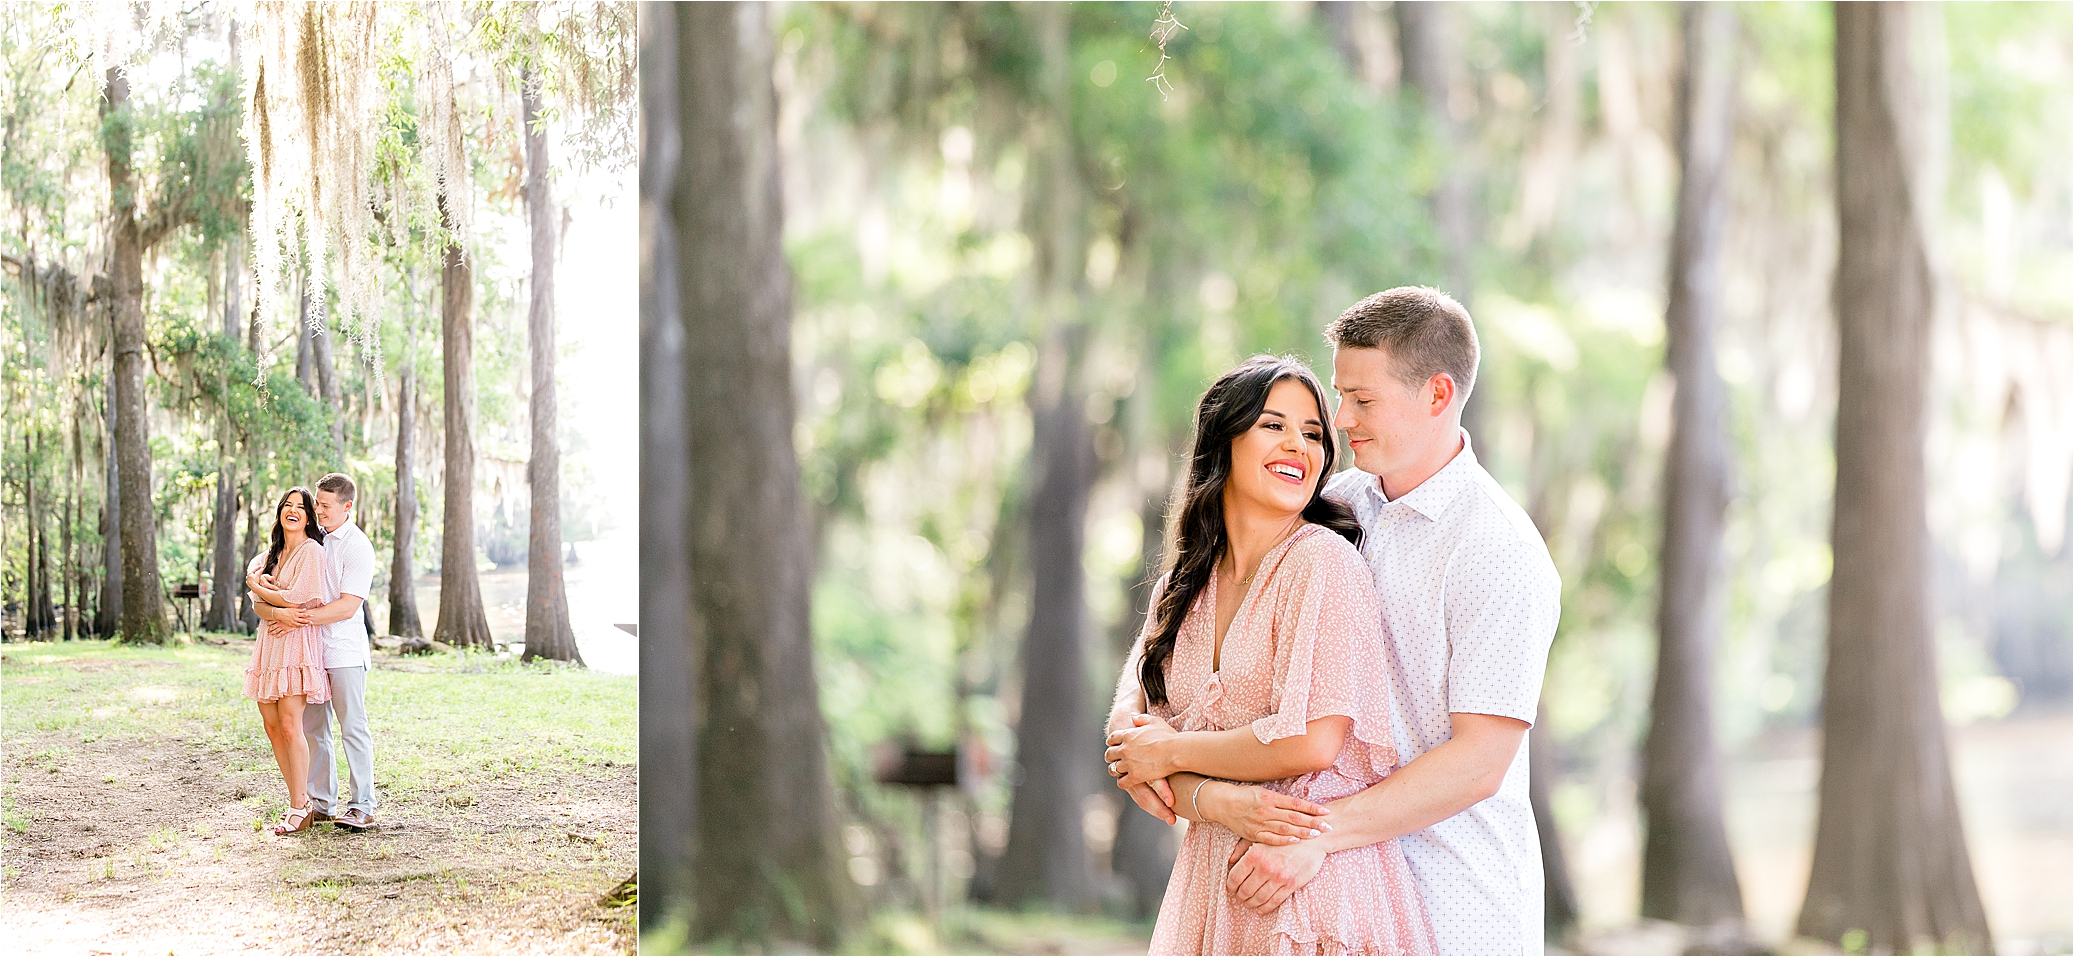 A couple embraces under the trees at Caddo Lake State Park